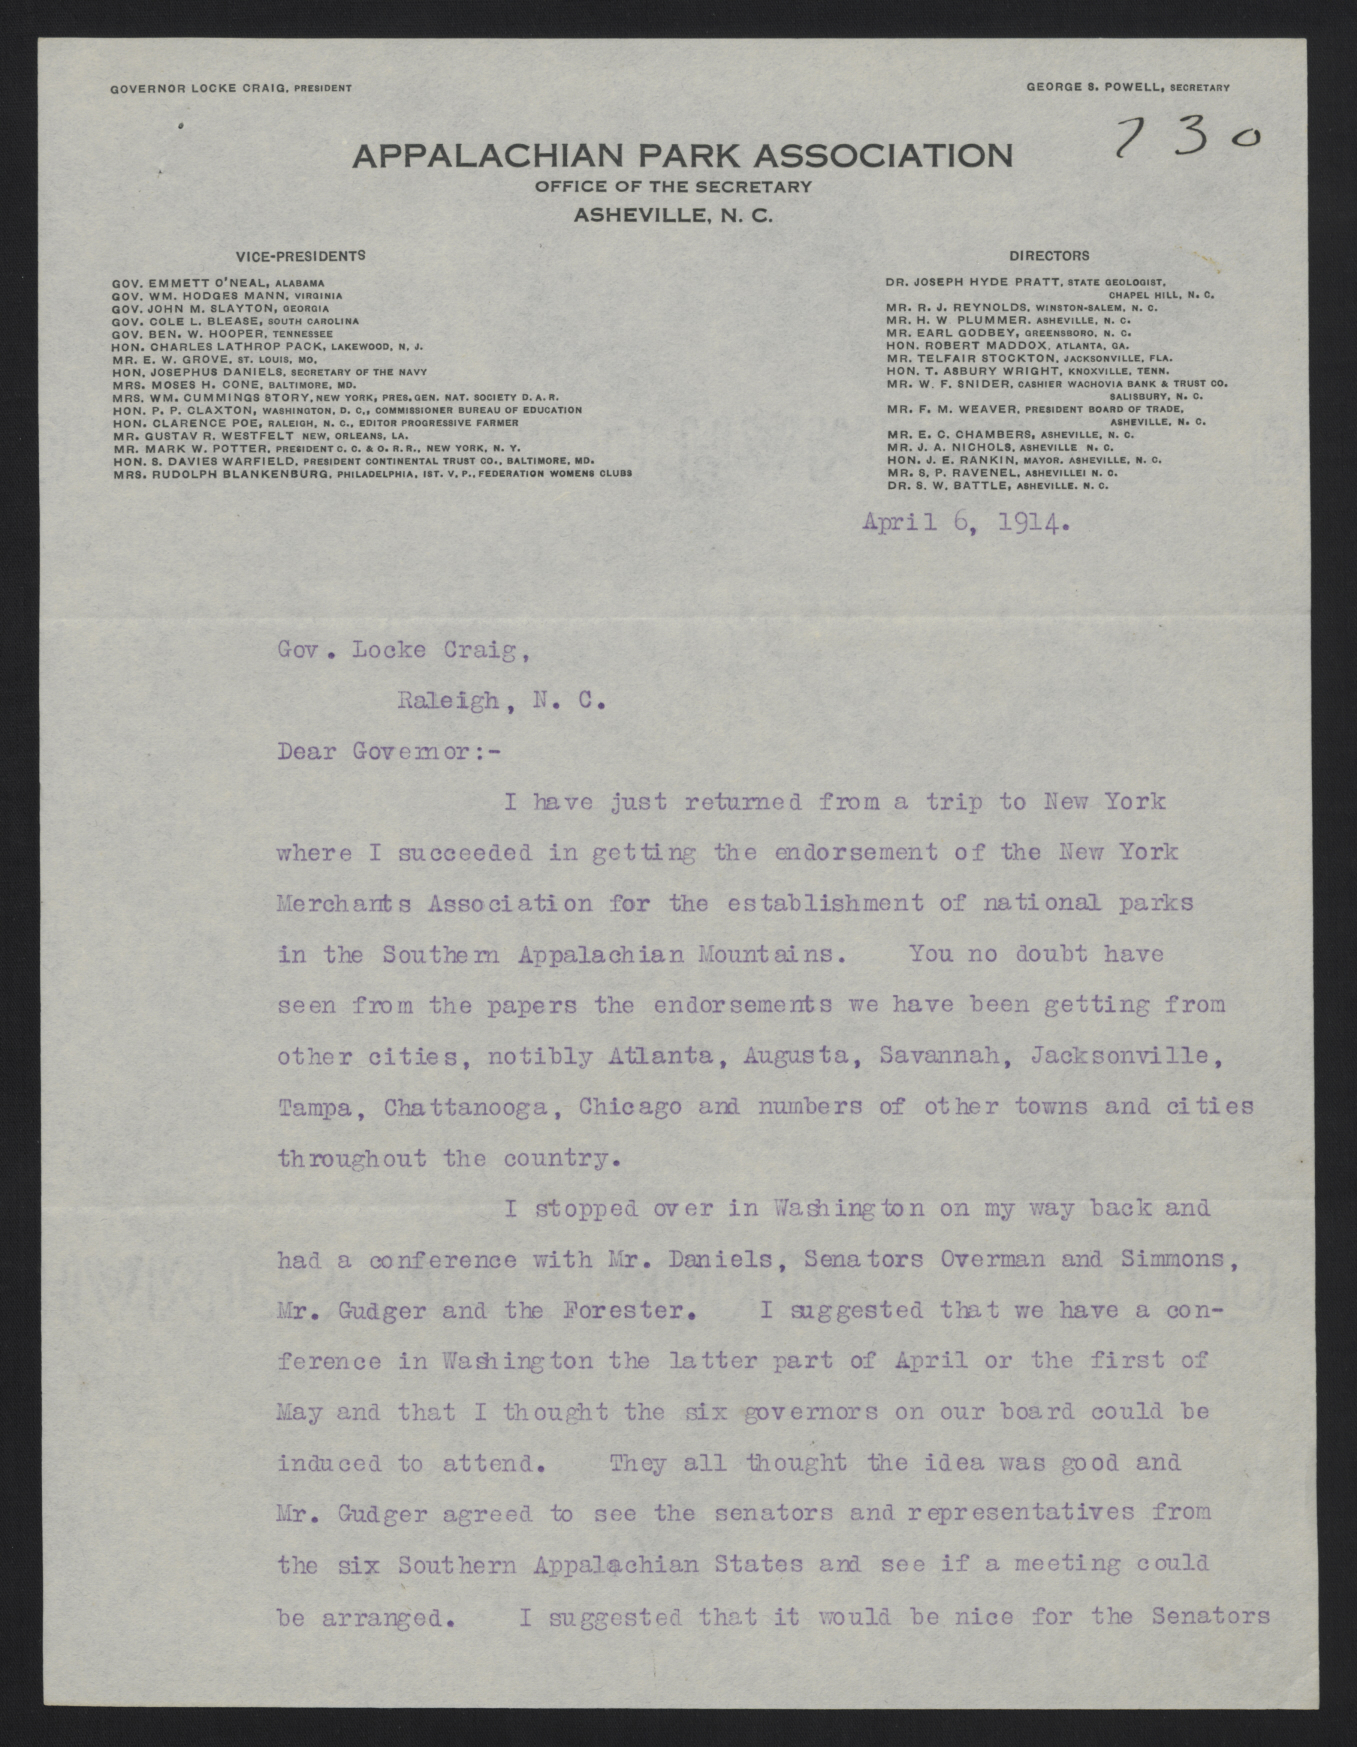 Letter from Powell to Craig, April 6, 1914, page 1